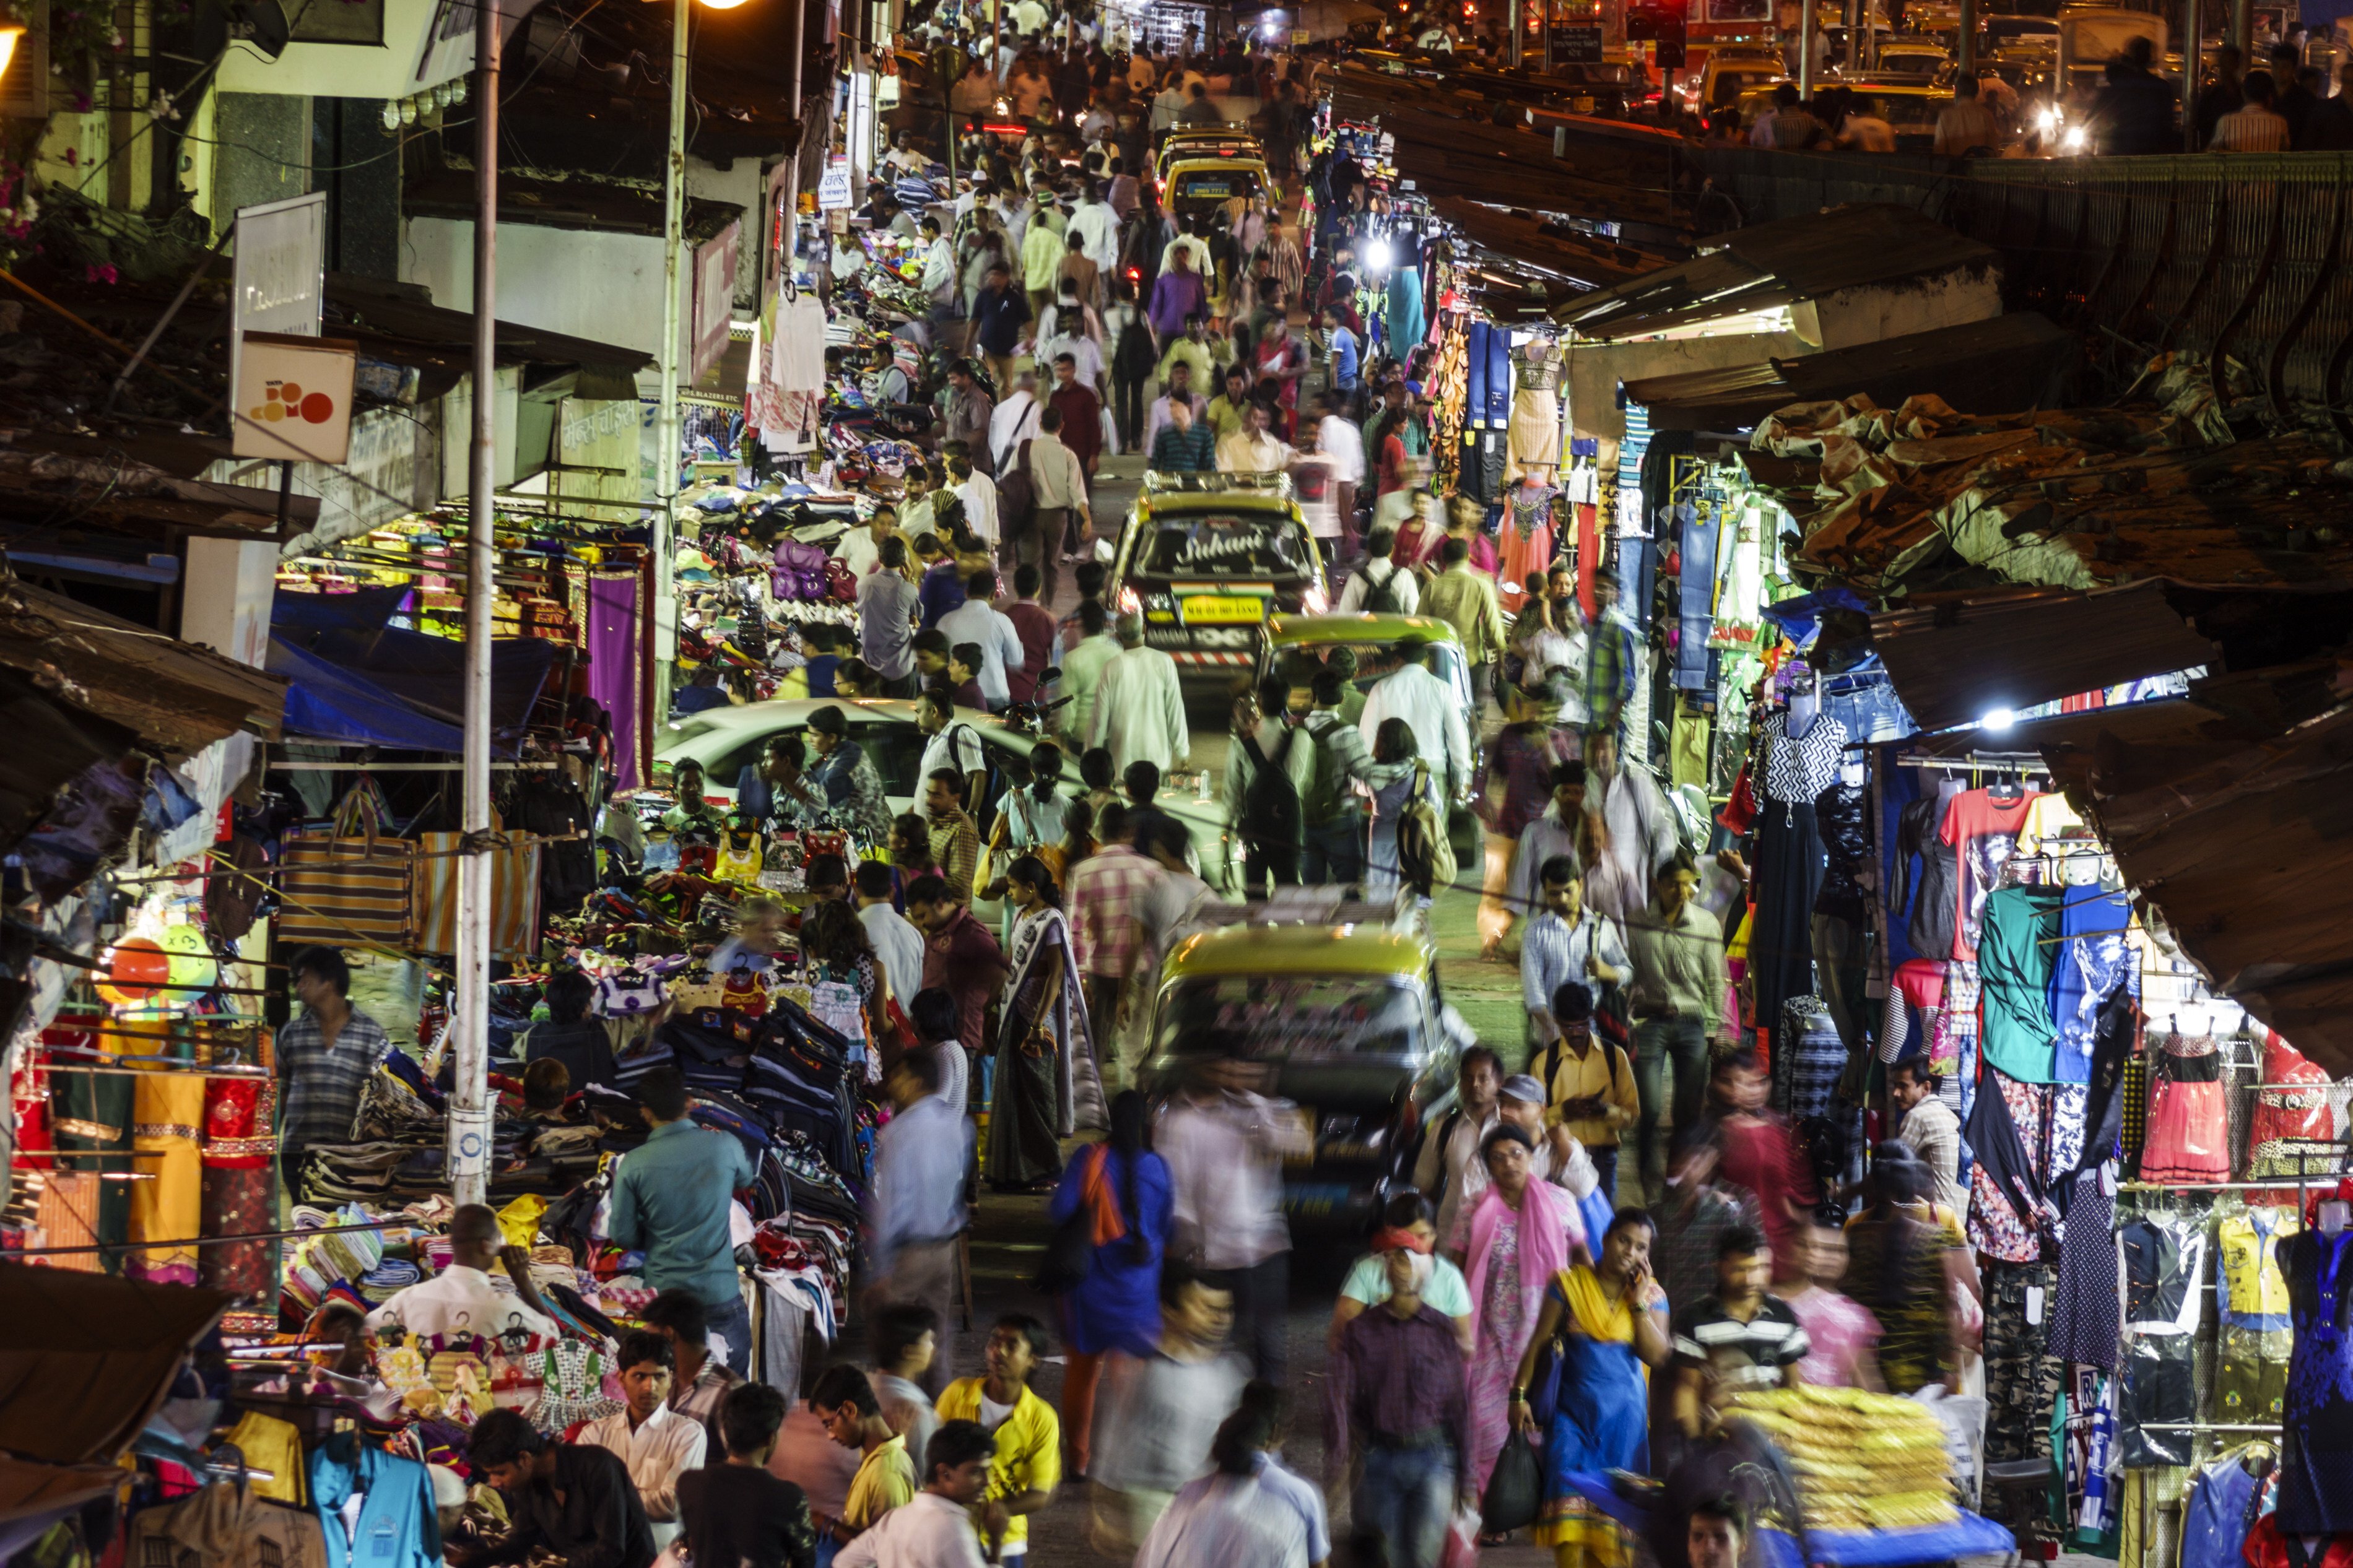 A night scene in crowded Mumbai, ranked the world’s most stressful major city to live in. Photo: Getty Images